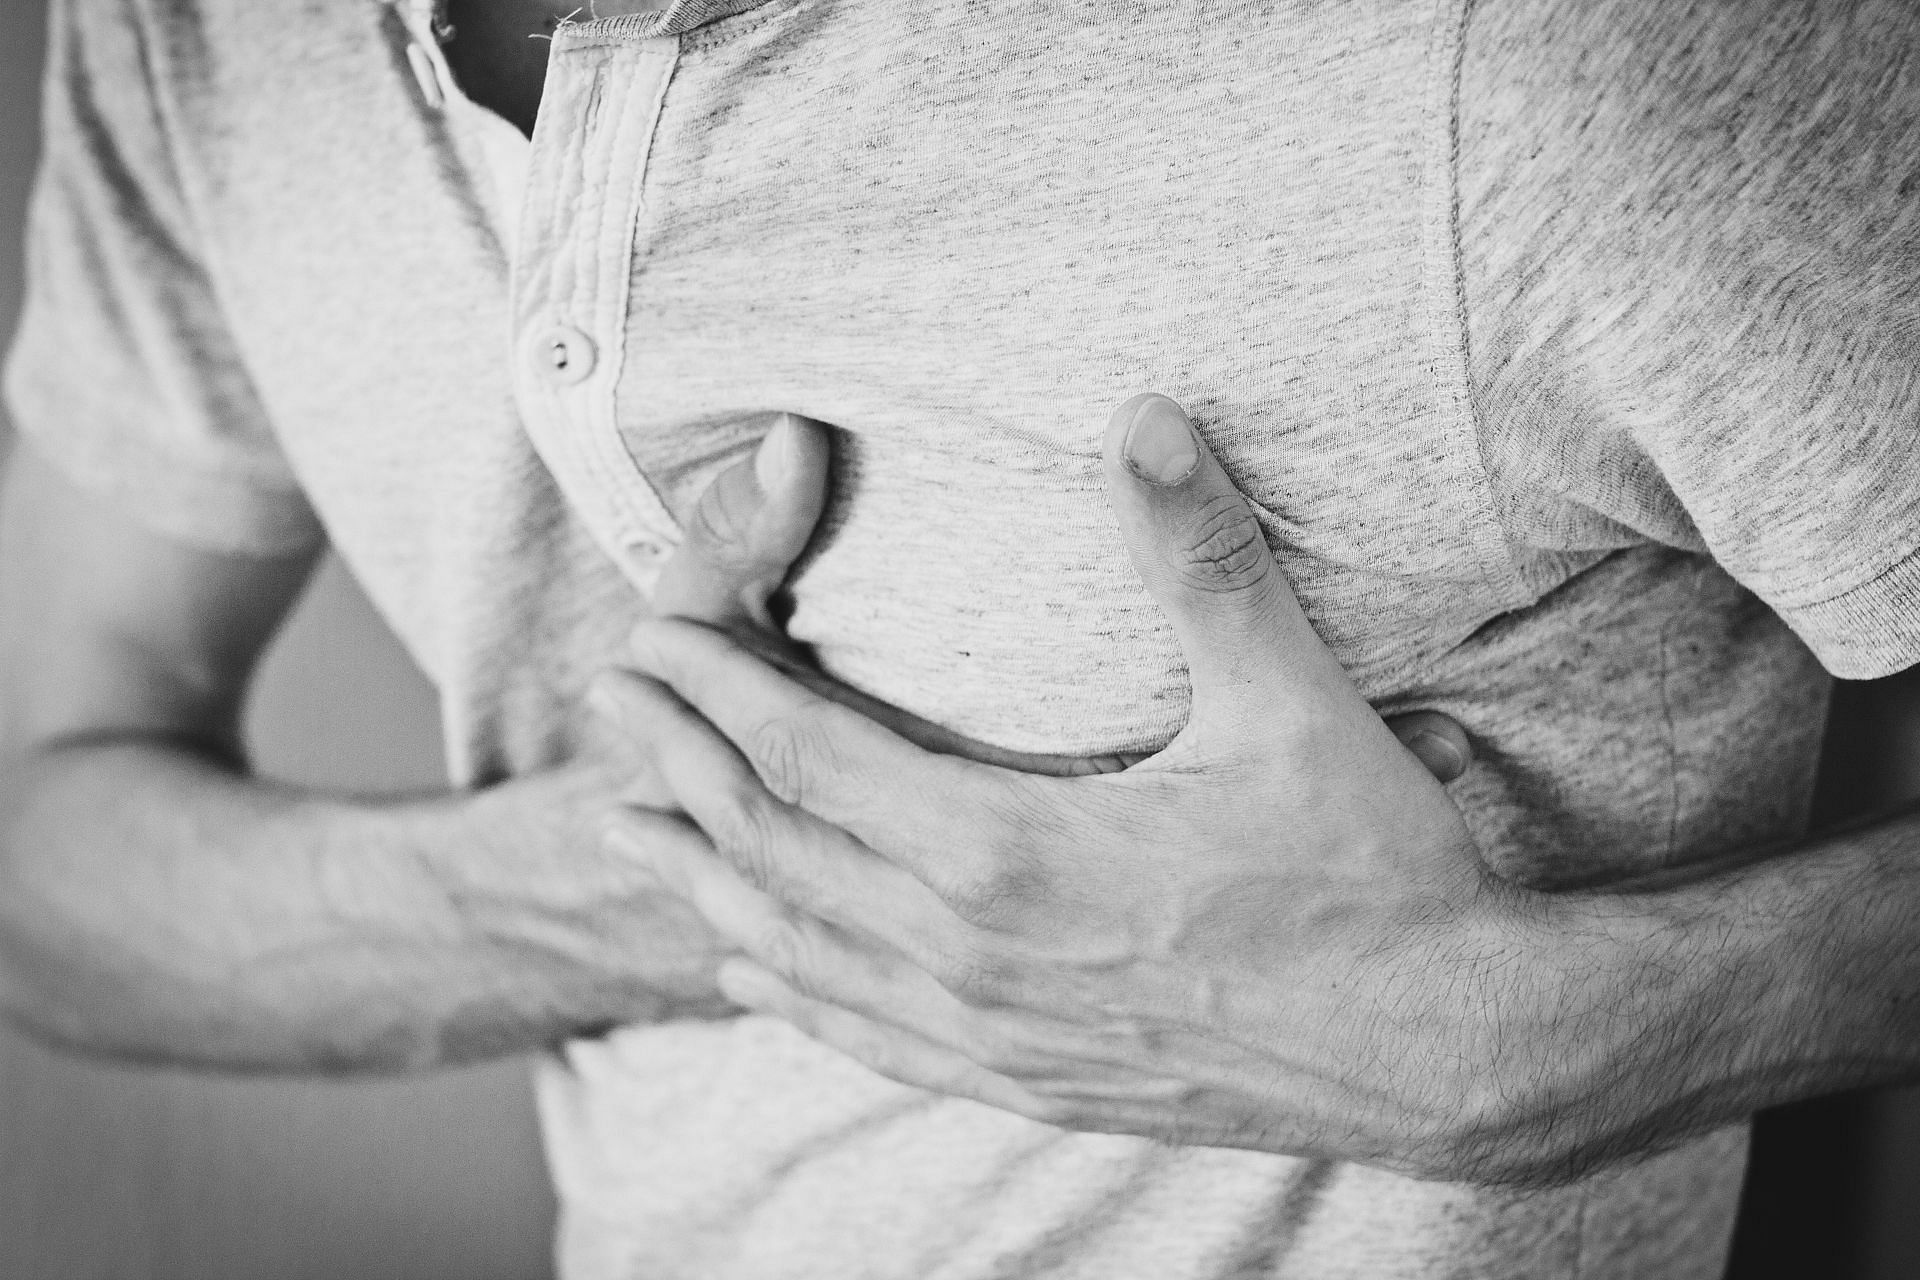 Not all exercises are good for your heart. (Image by Freestocksorg / Pexels)